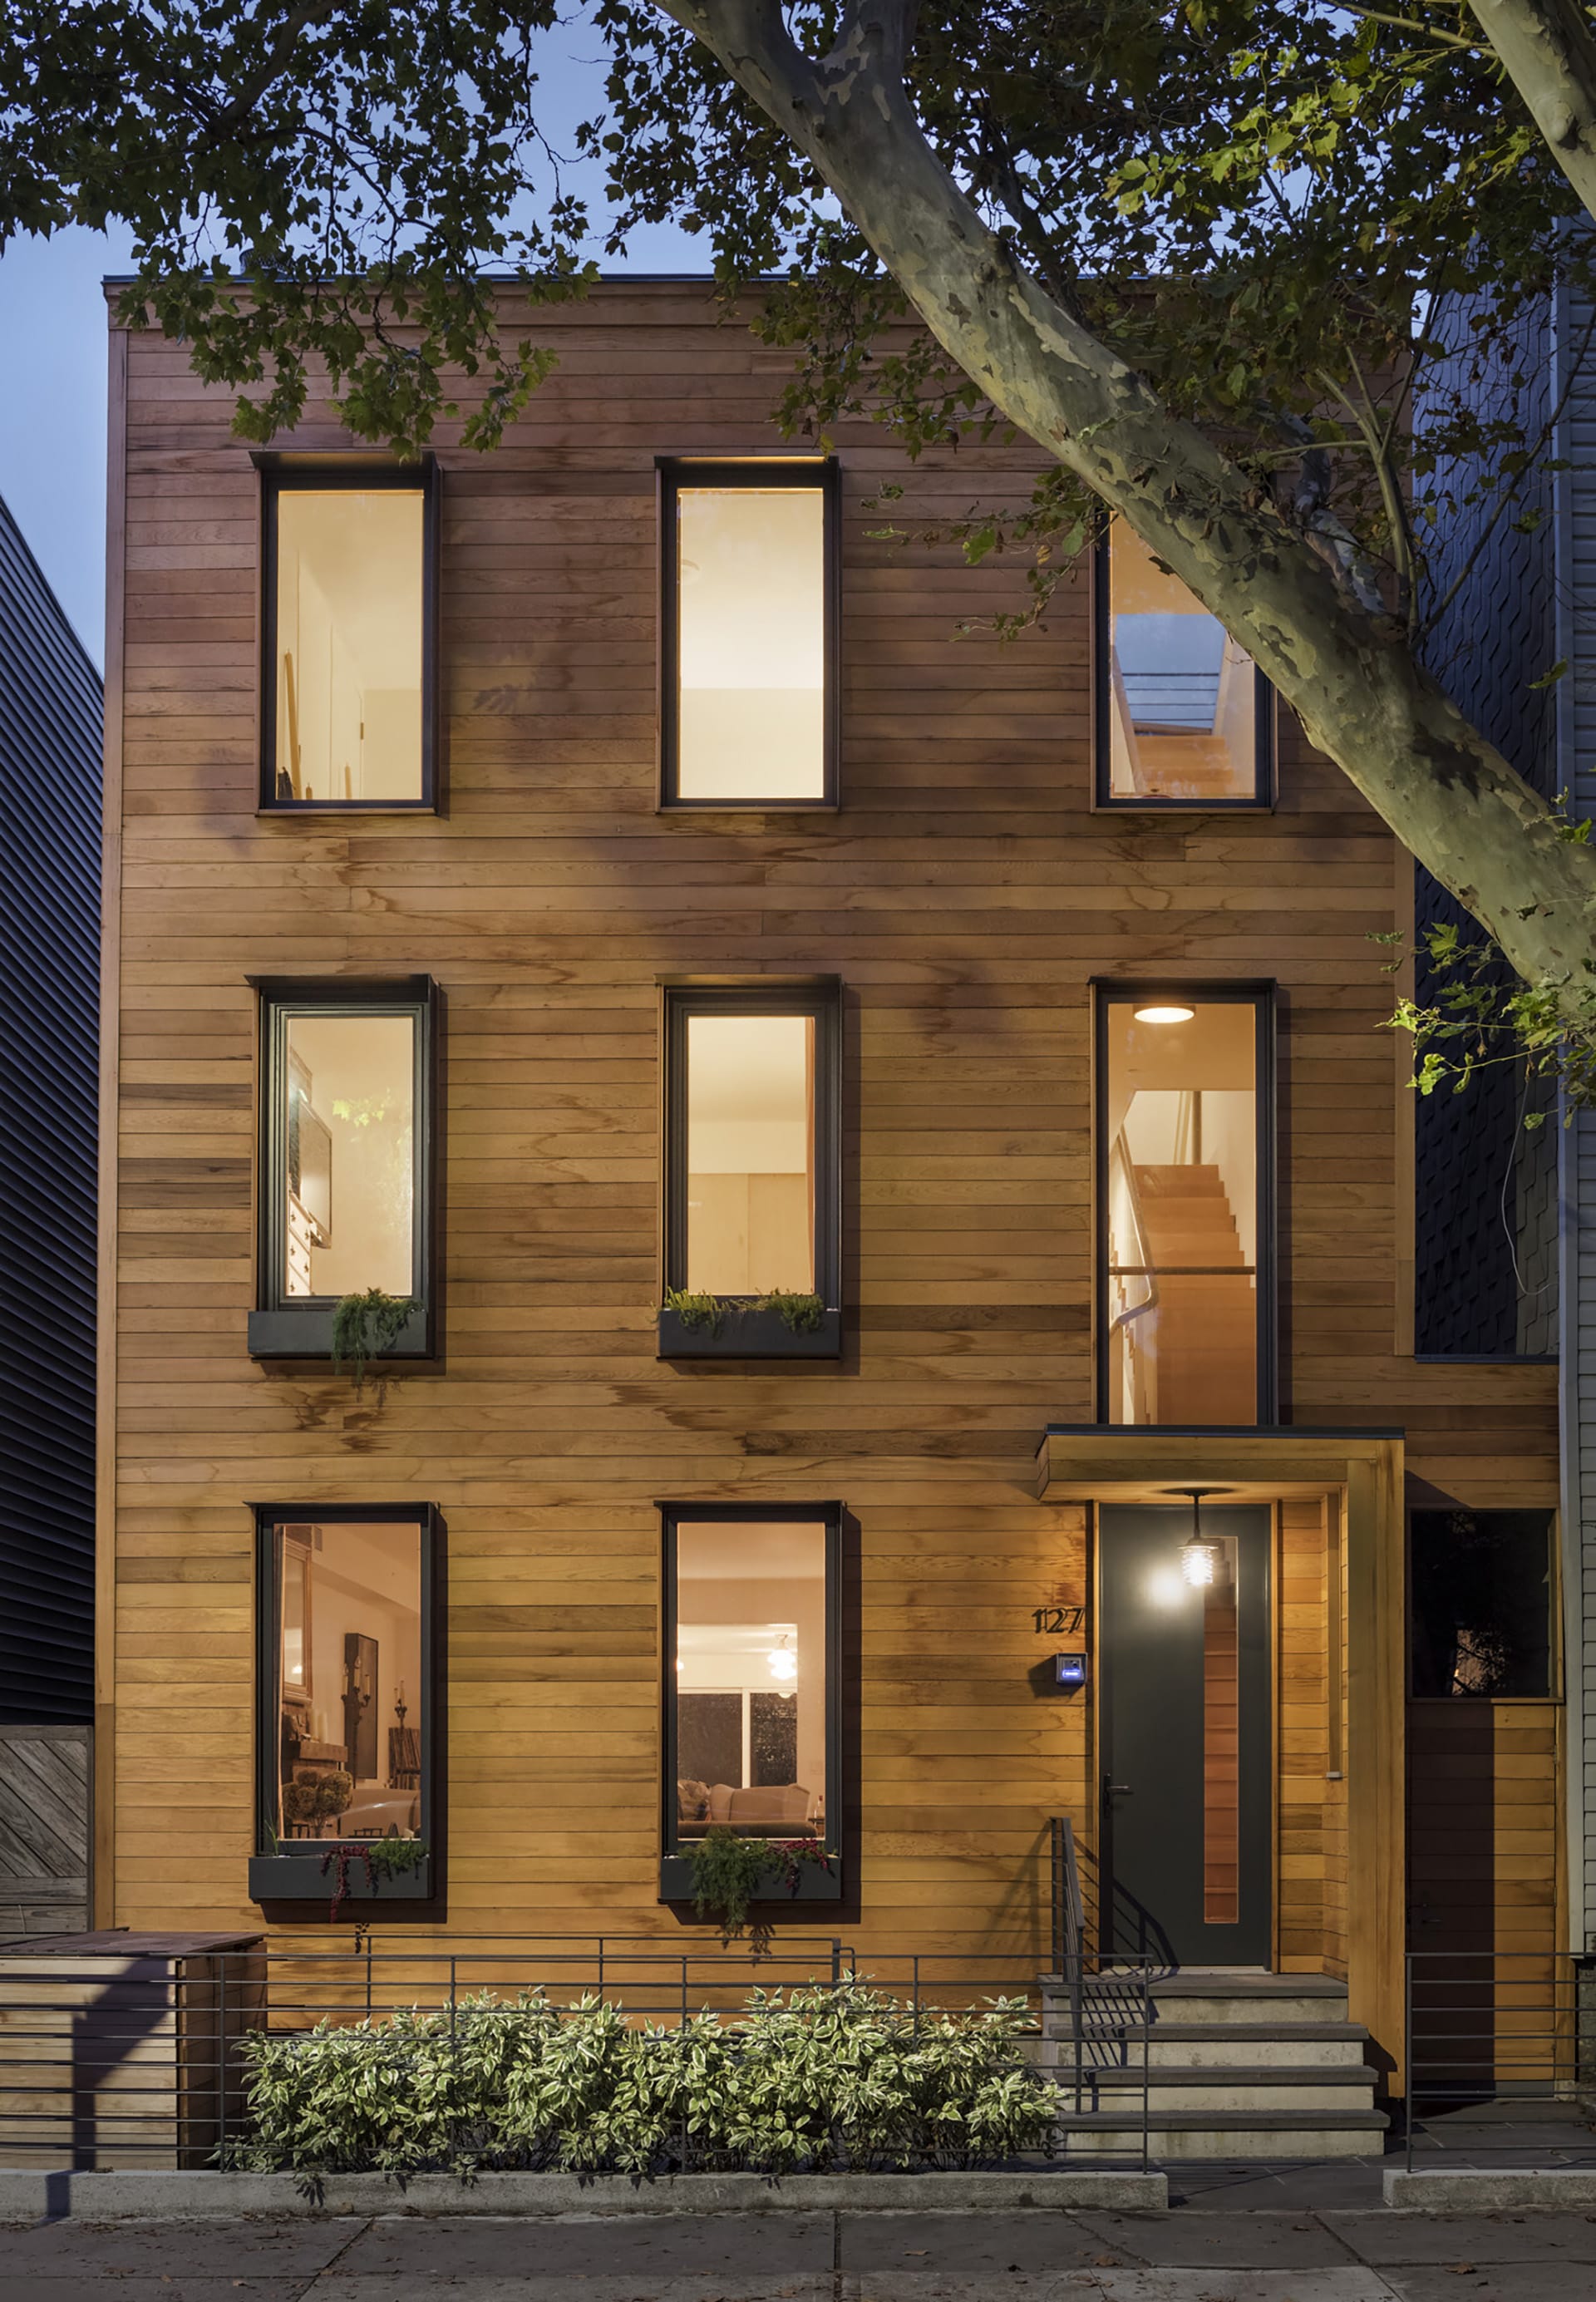 Exterior of a wood-framed Greenpoint townhouse with cedar siding, planters in front of the home and windows, and black window and door openings at night.